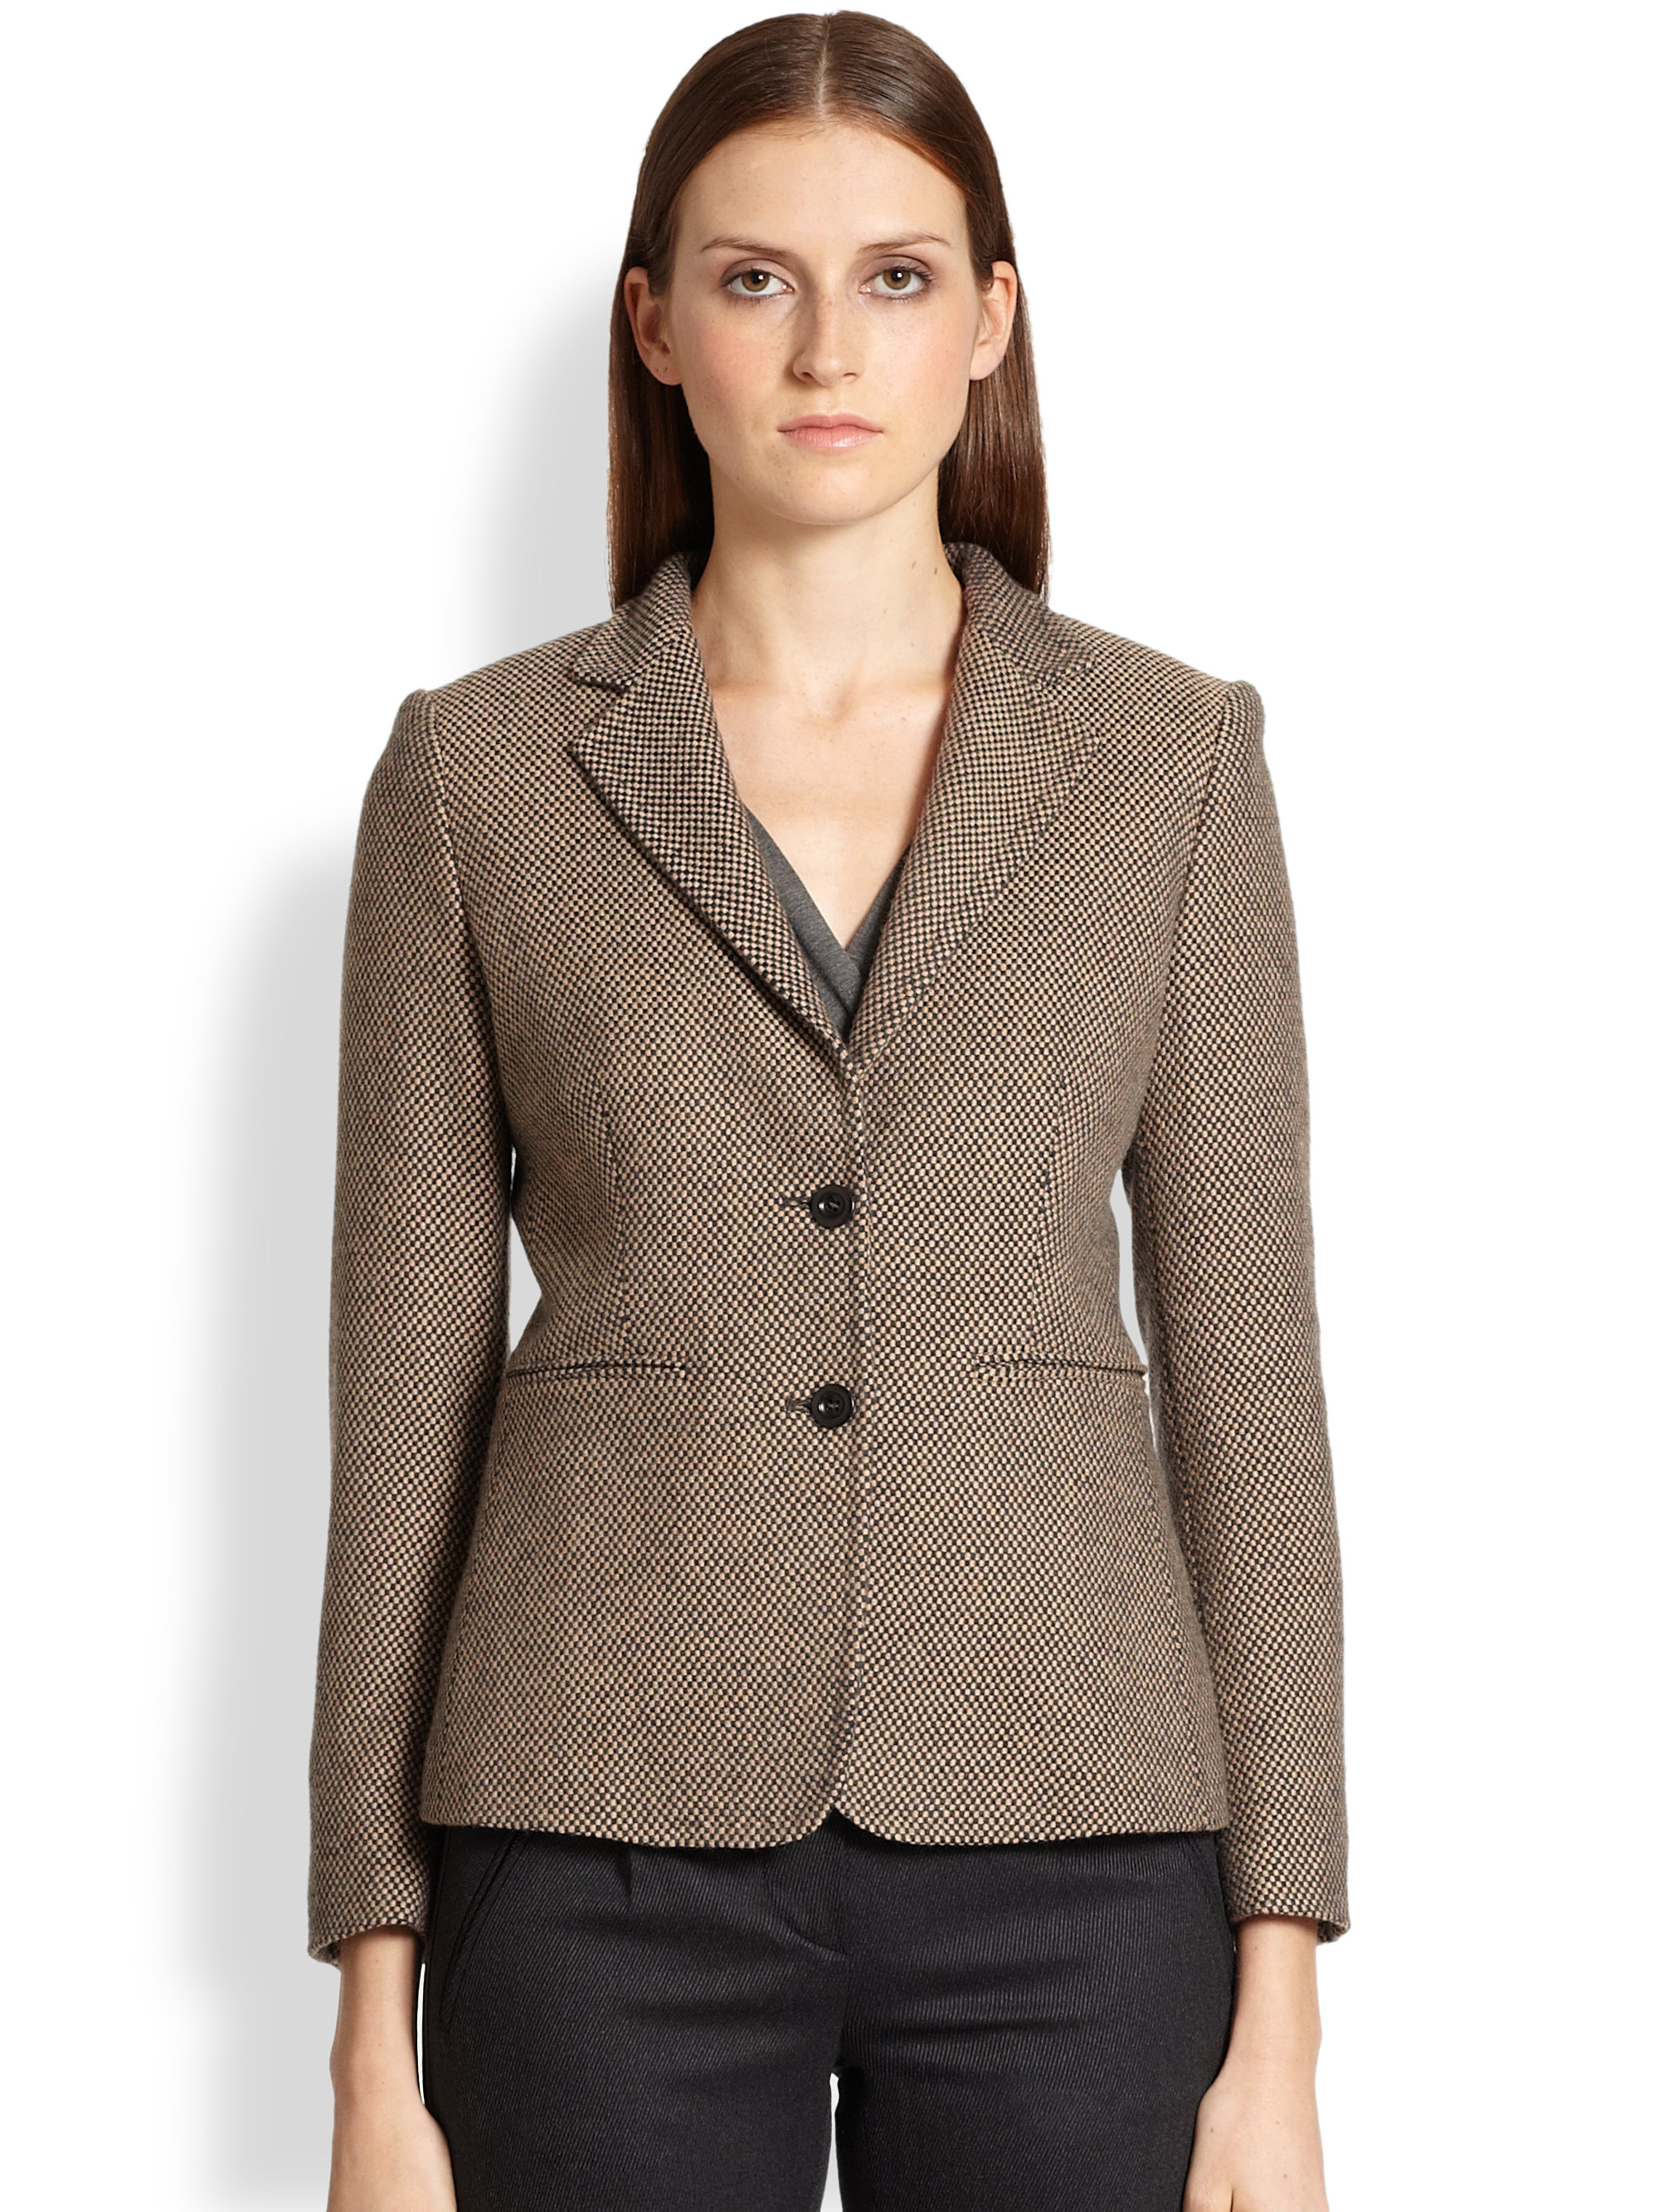 Max mara Albania Check Twobutton Jacket in Brown | Lyst